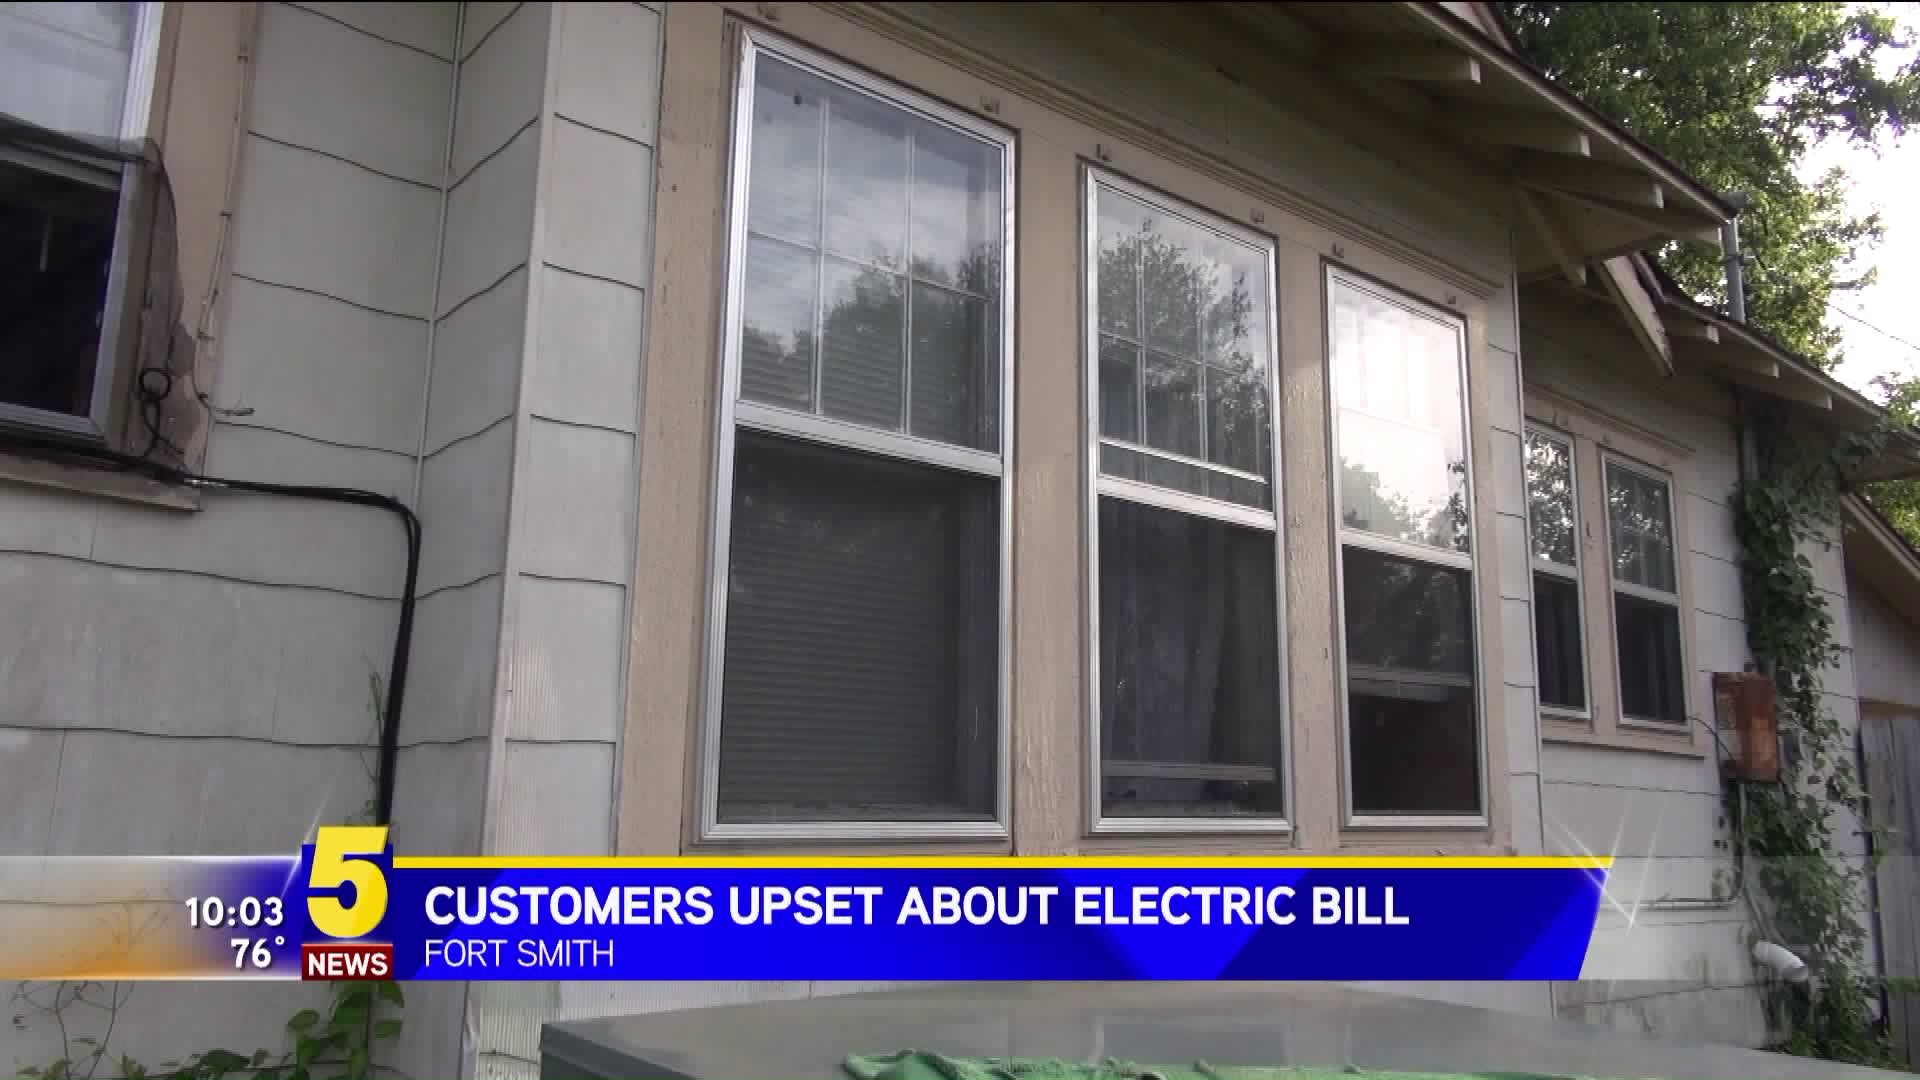 Customers Upset About Electric Bill